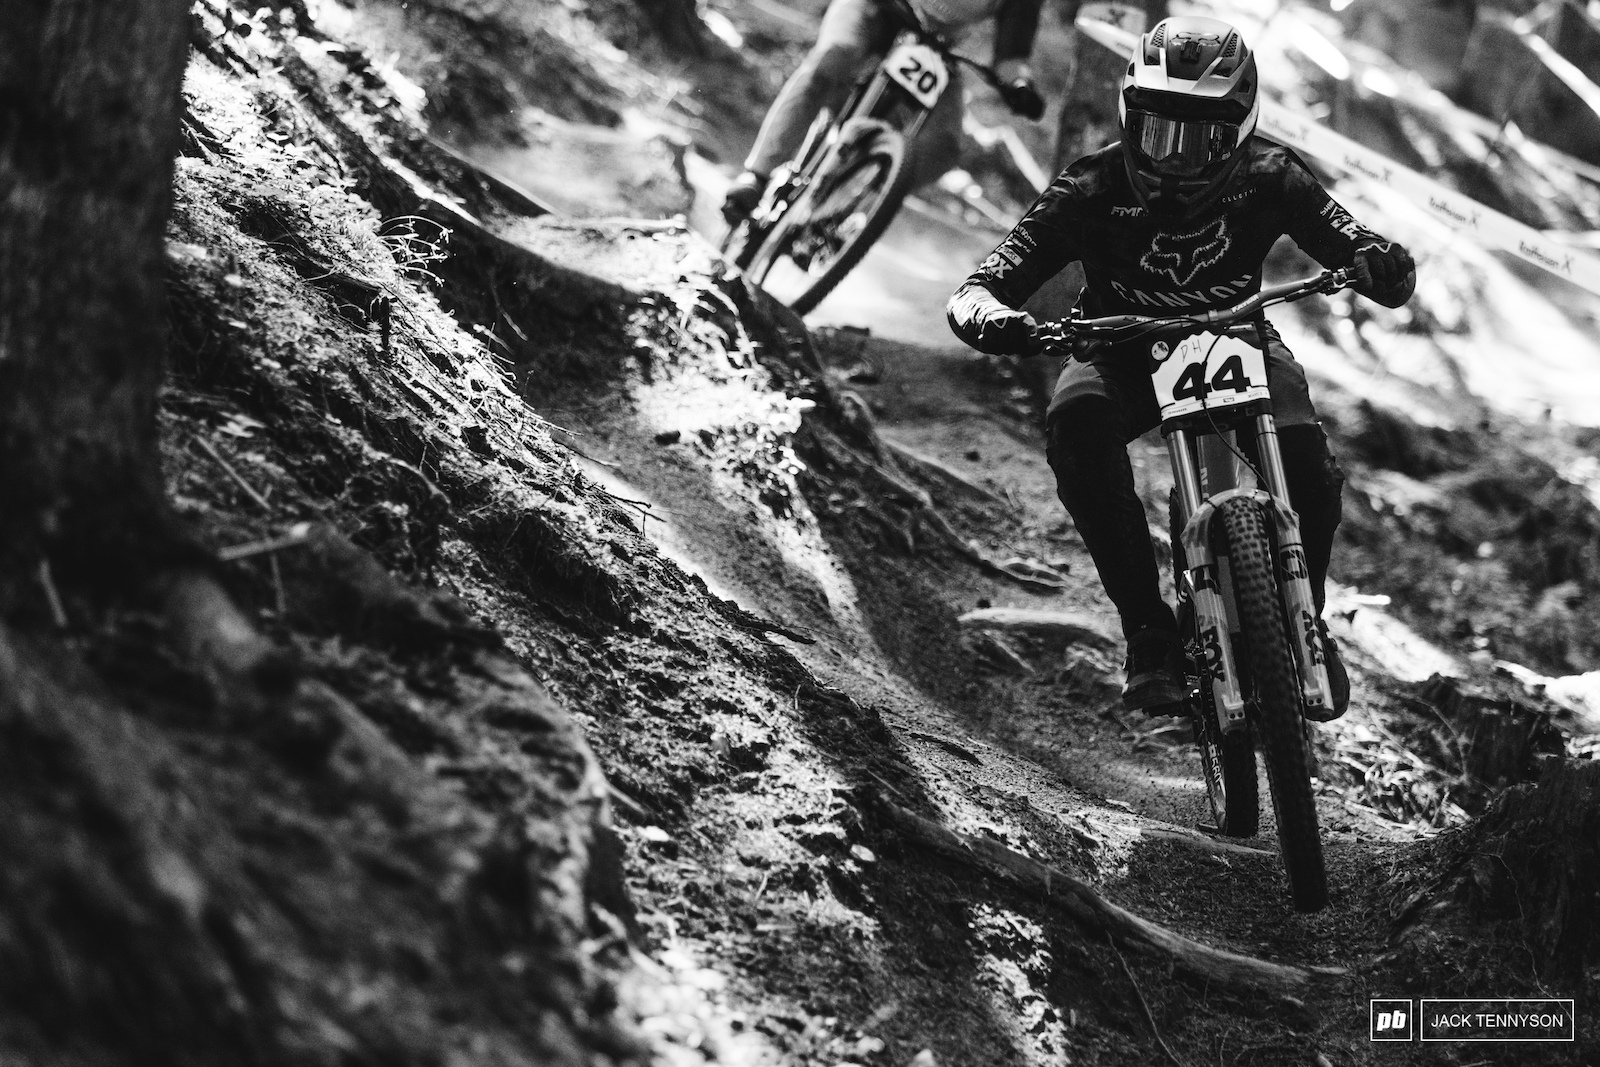 After standing on the podium in whip off Kaos was back to his roots racing downhill.